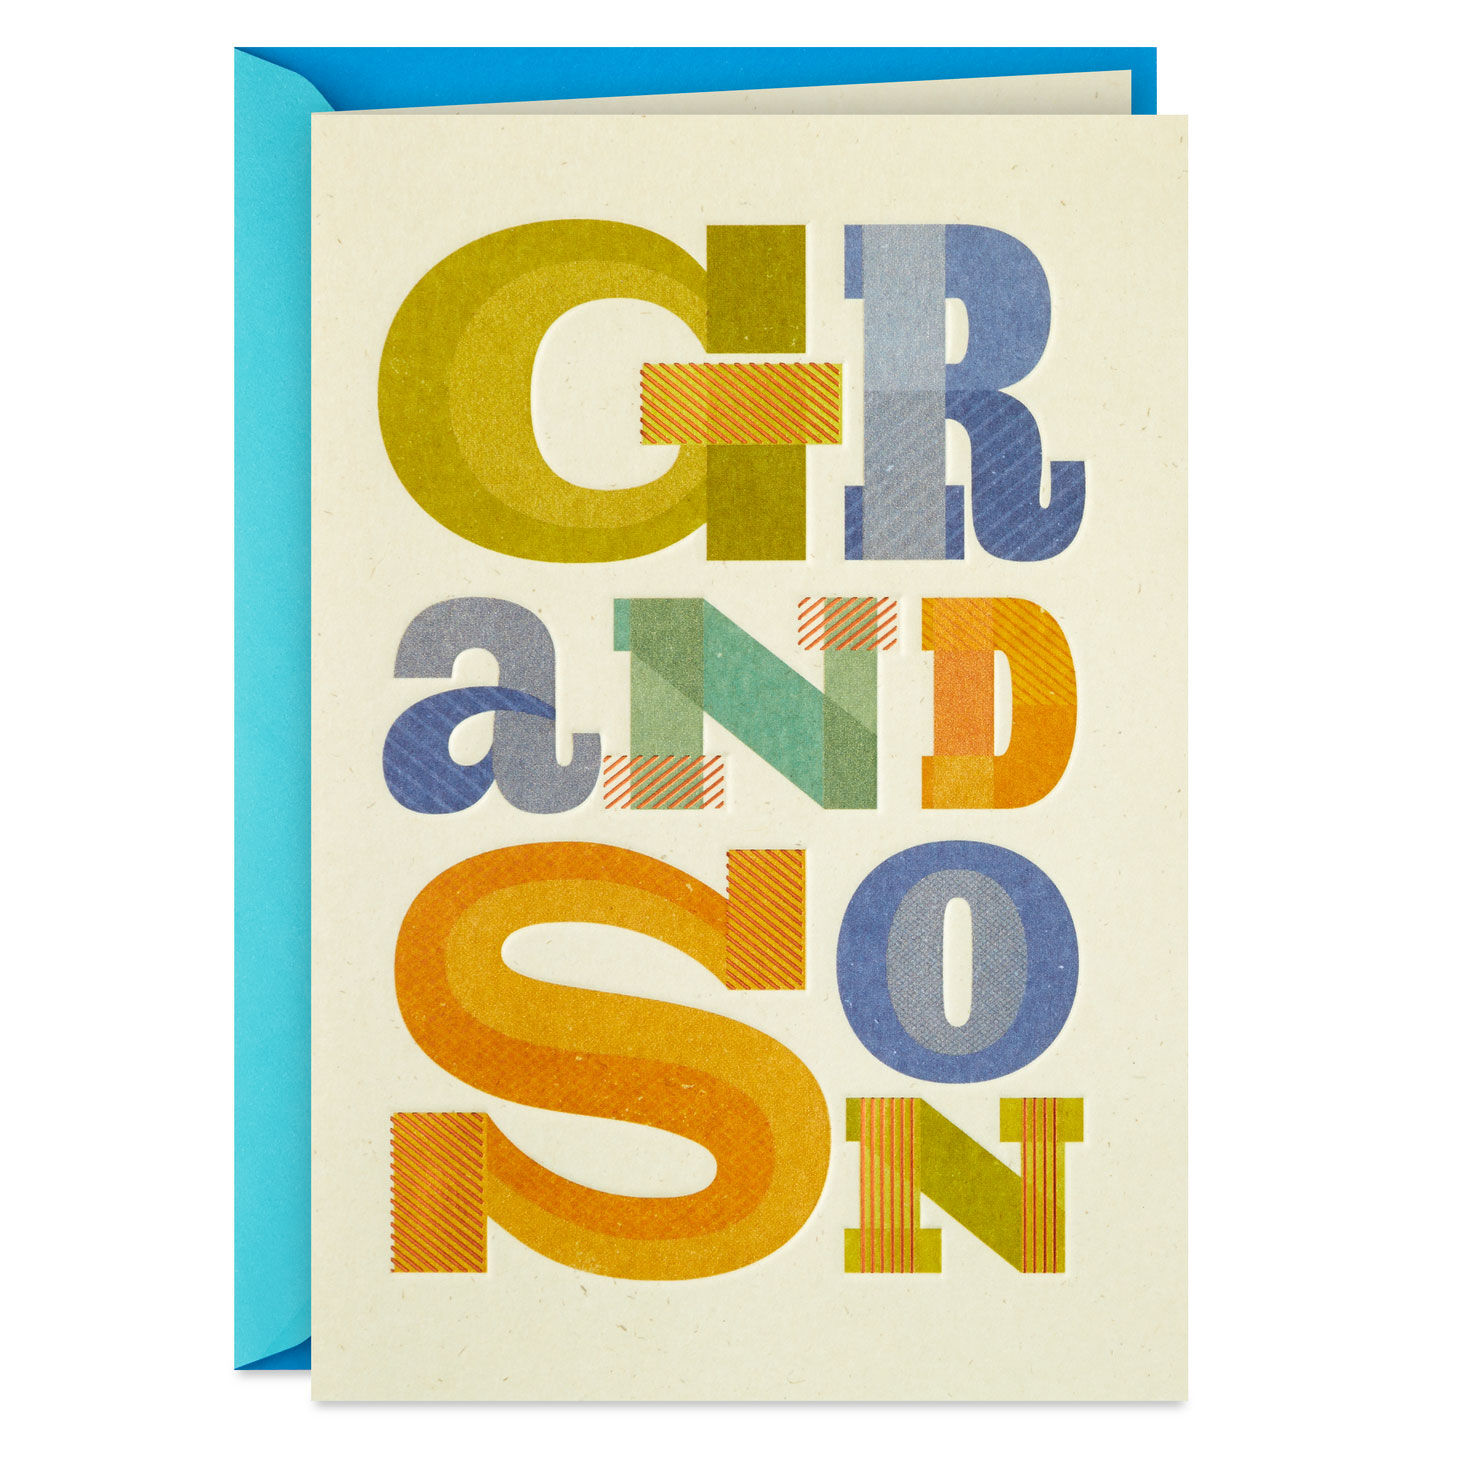 You Are Loved Birthday Card for Grandson for only USD 5.59 | Hallmark